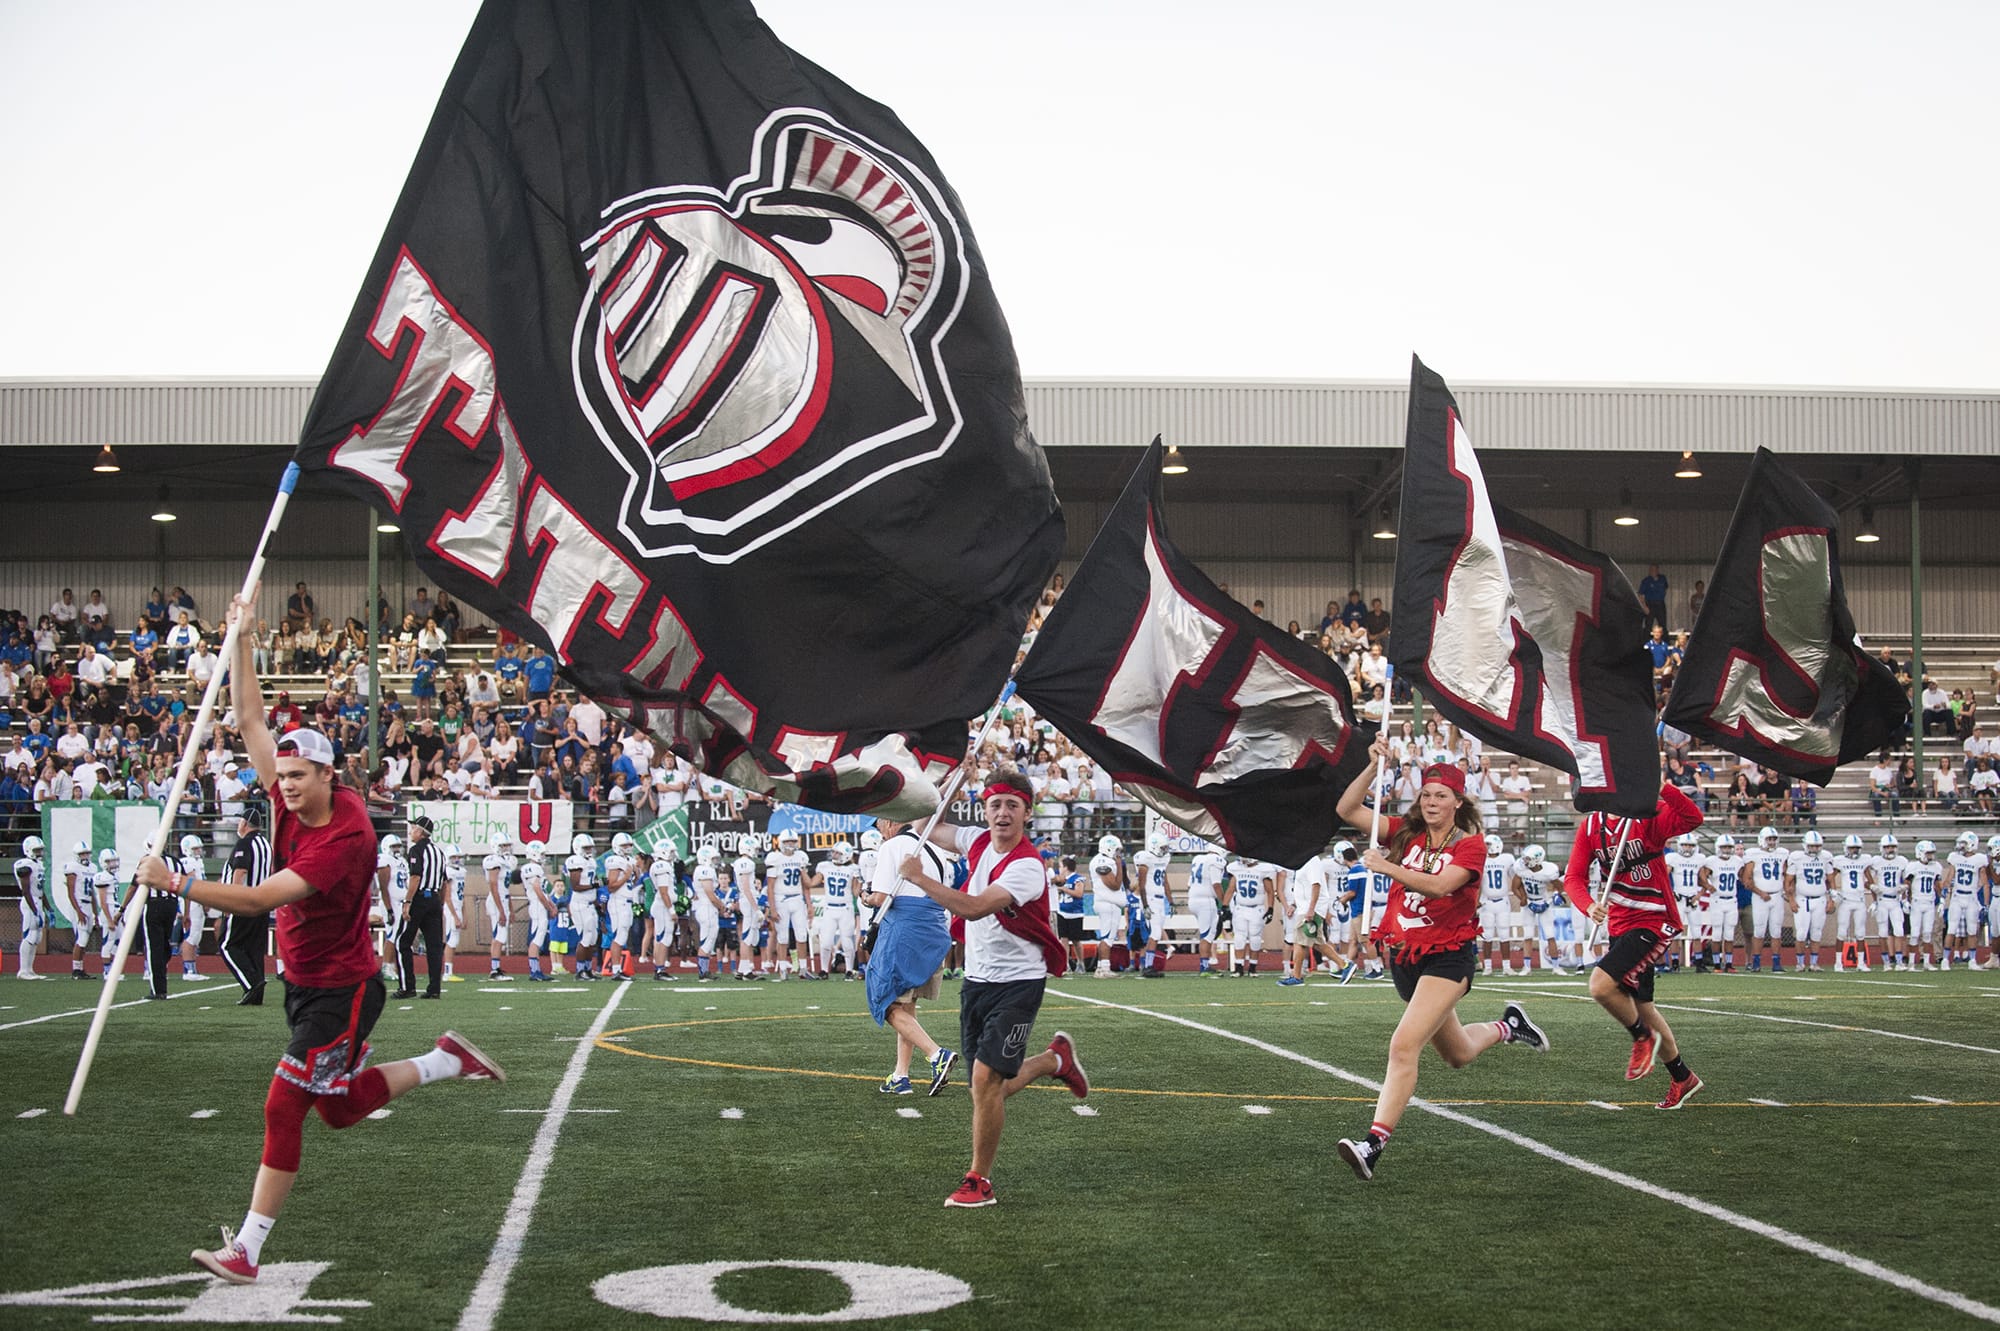 Union fans run across the field before the game against Mountain View, Friday September 9, 2016, at McKenzie Stadium.